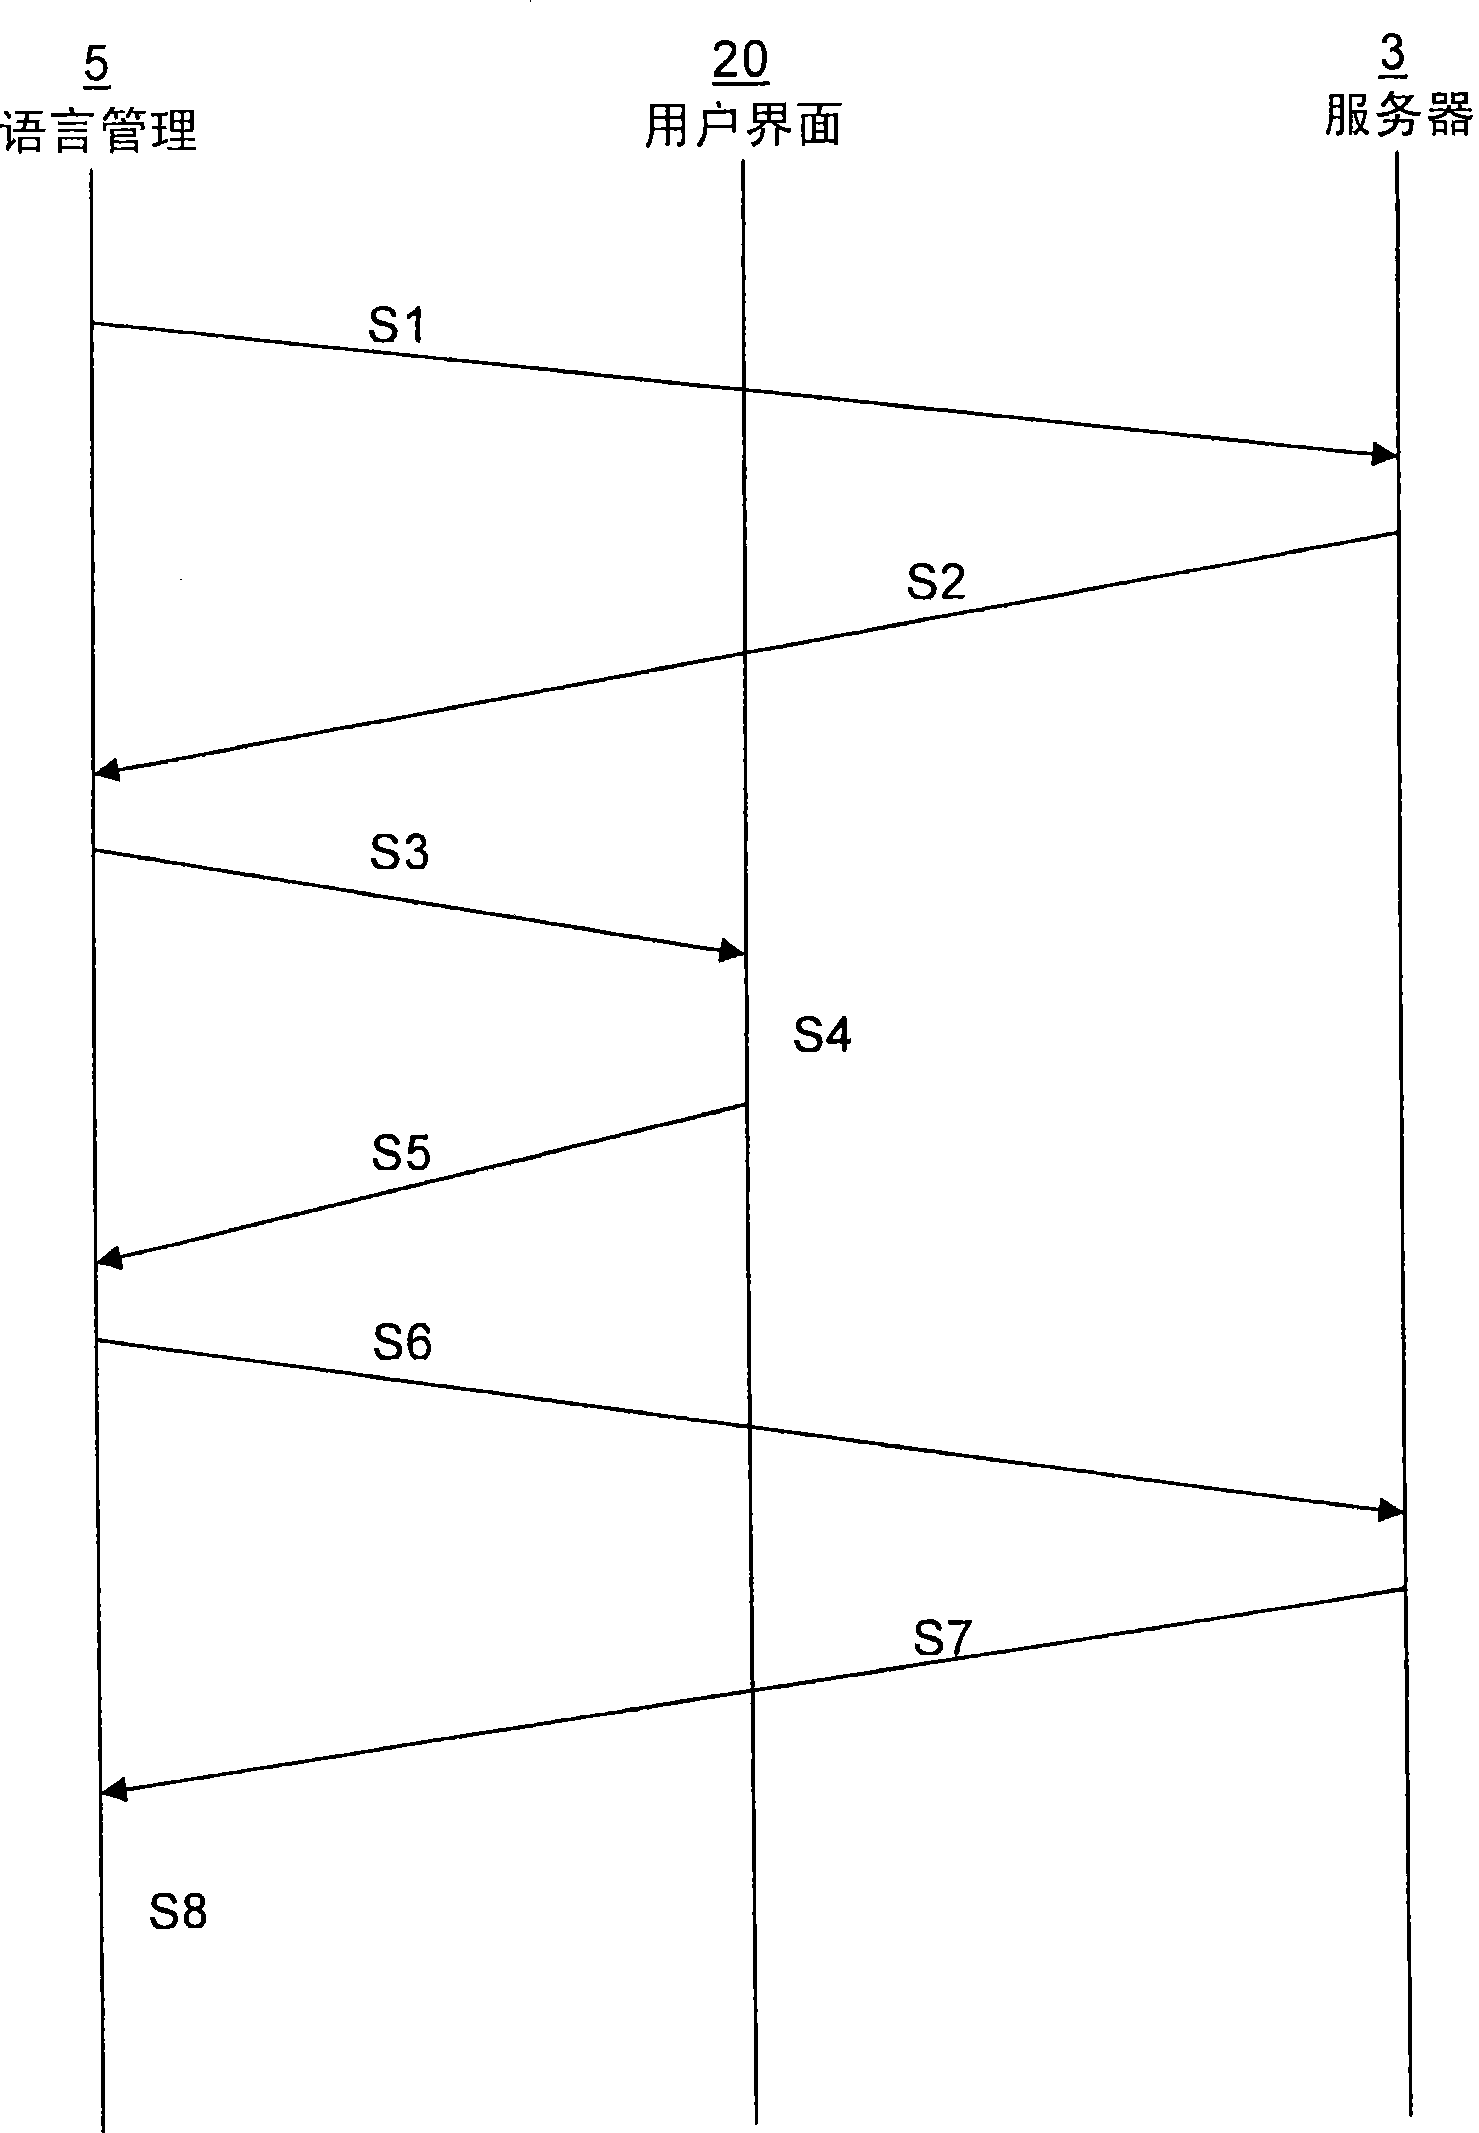 Method and device for updating a language in a user interface